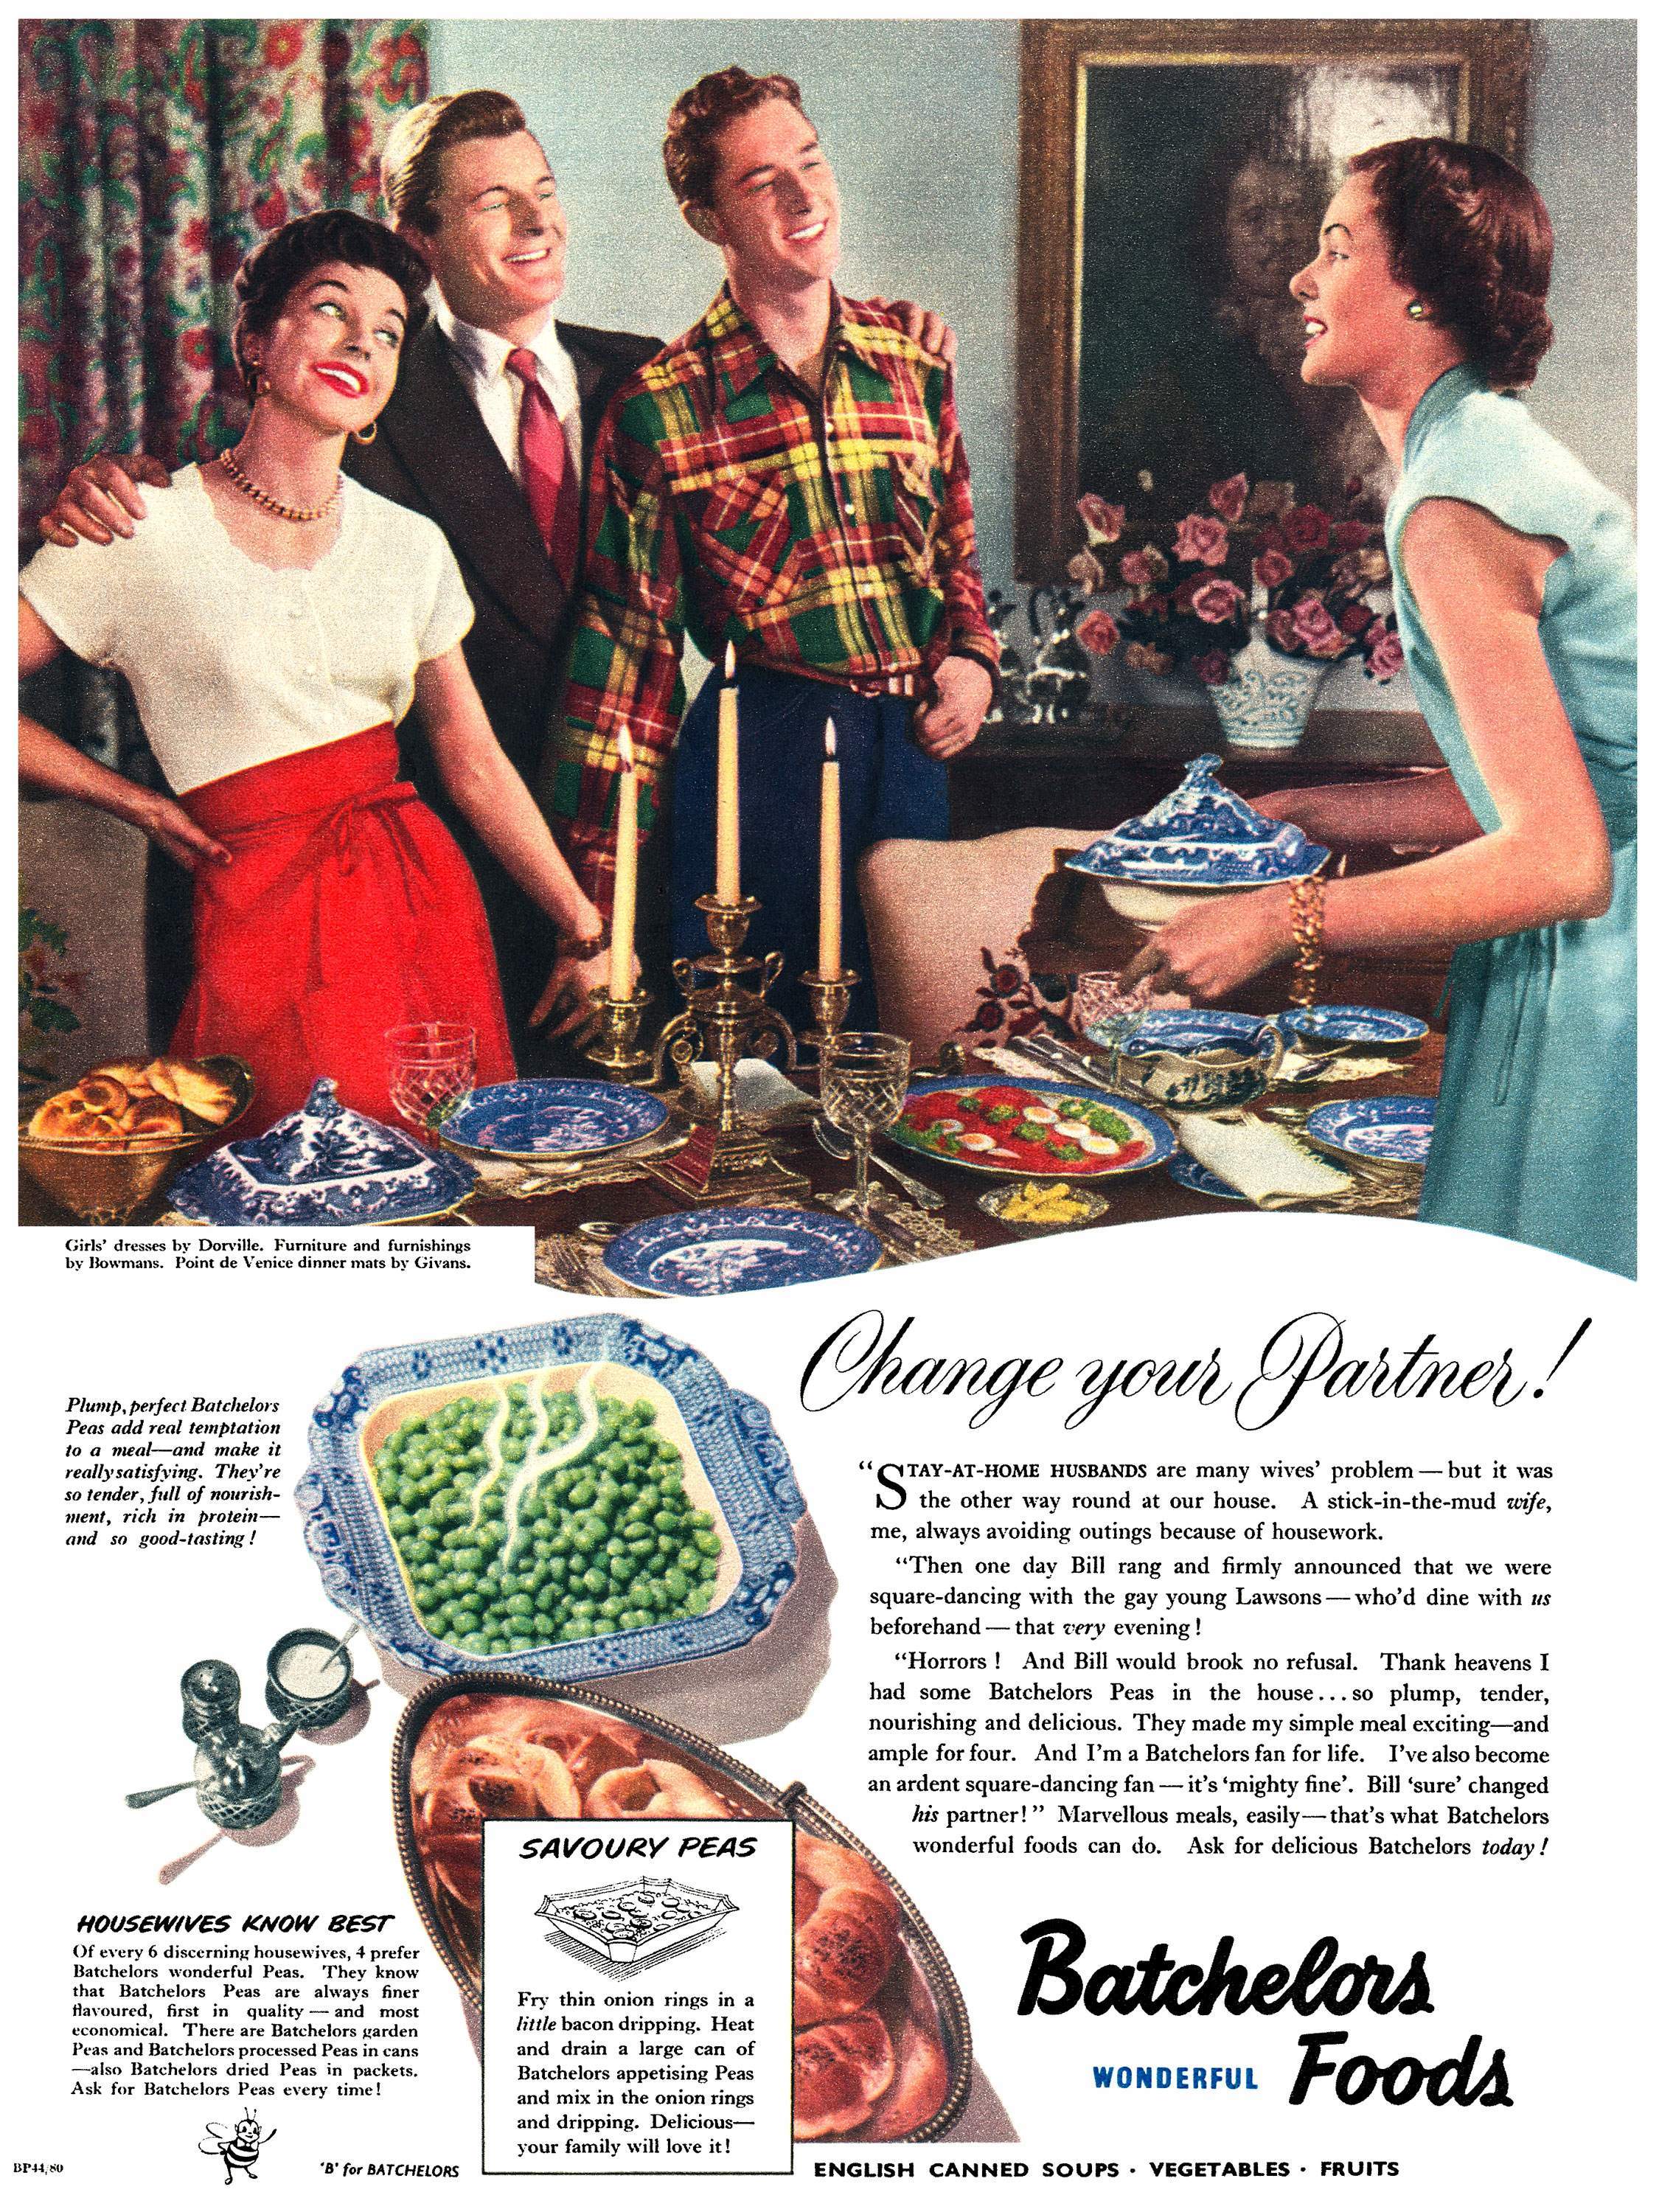 The Batchelors Foods Soup-Opera ads from the 1950s picture